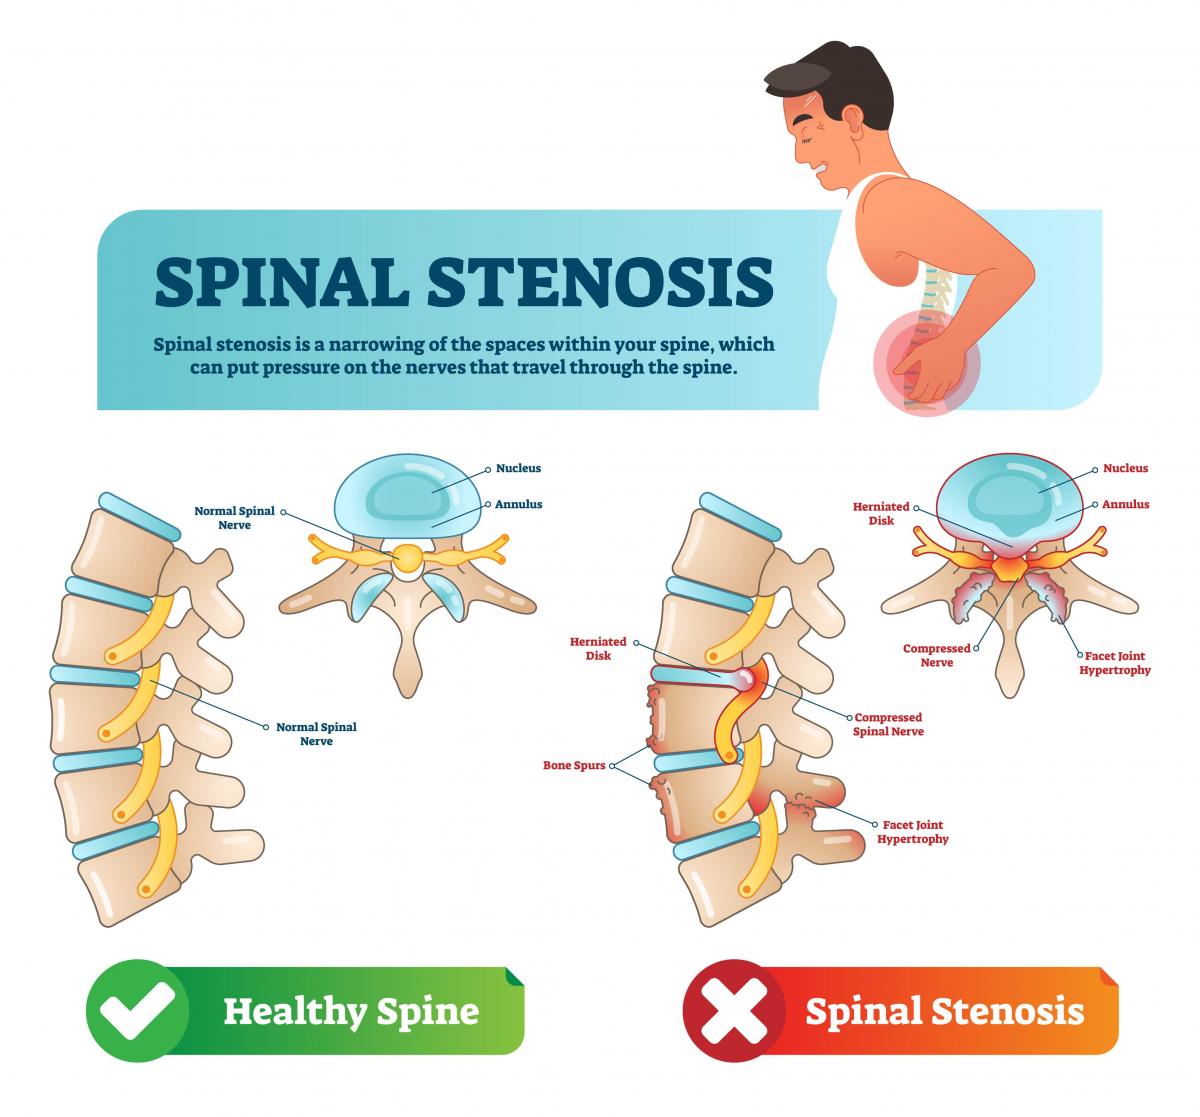 What Are the Different Treatments for Spinal Stenosis?